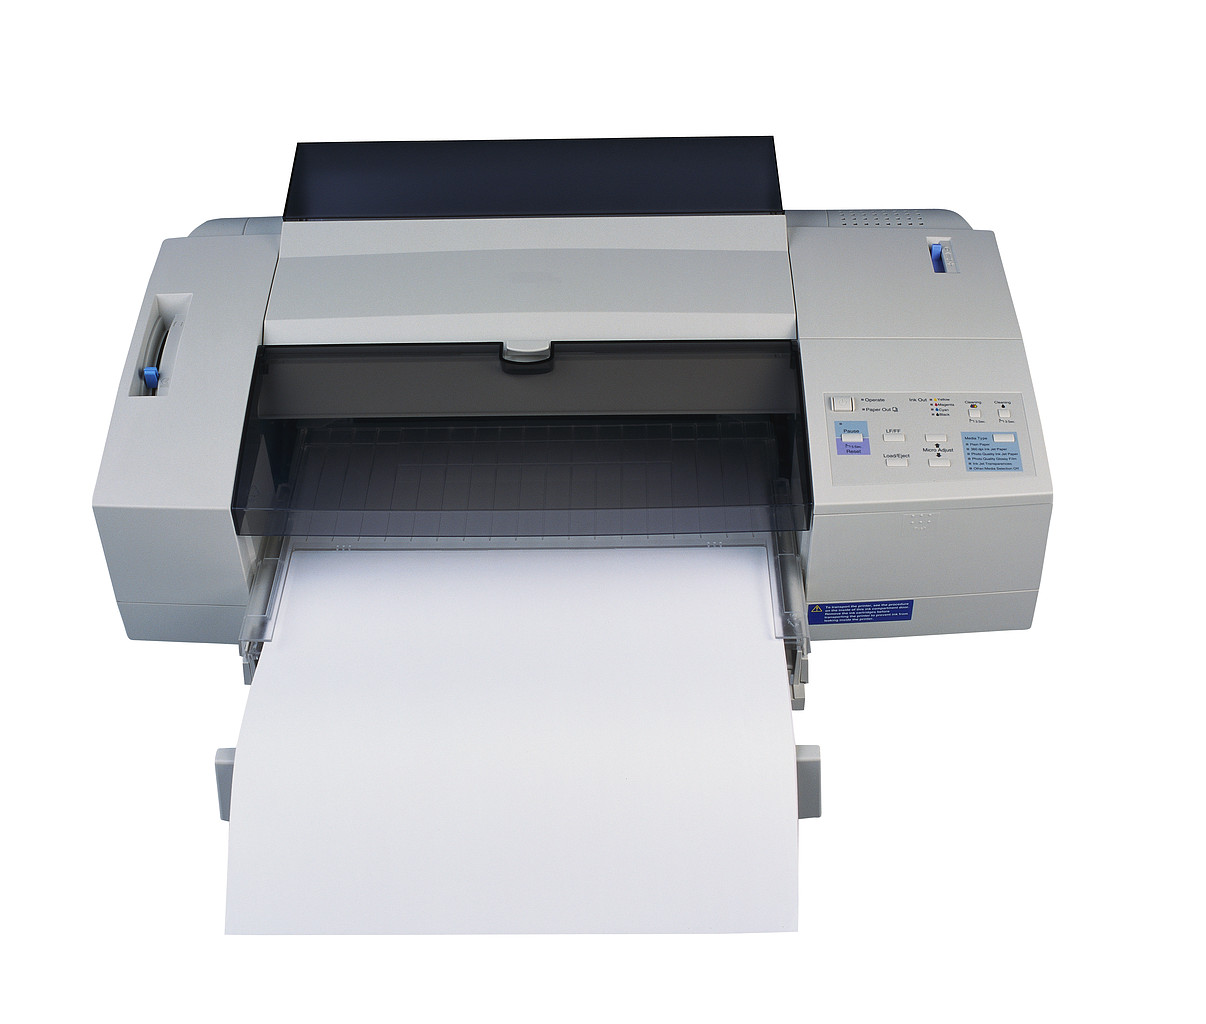 Computer Printer with Paper